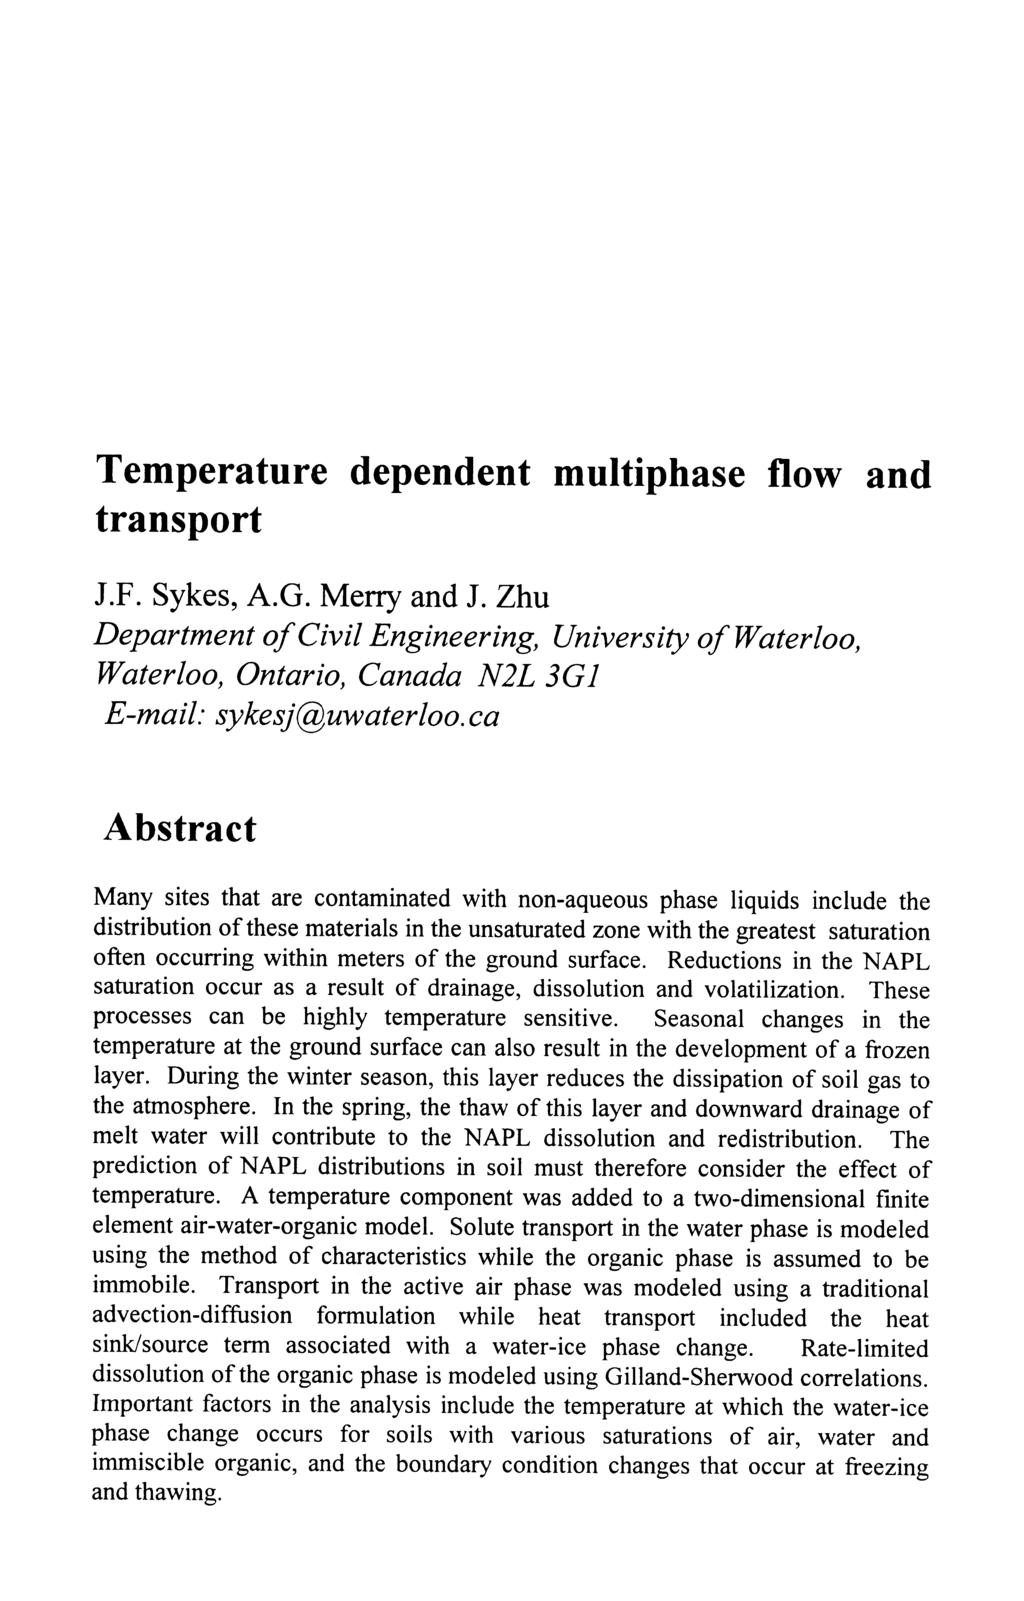 Temperature dependent multiphase flow and transport J.F. Sykes, A.G. Merry and J.